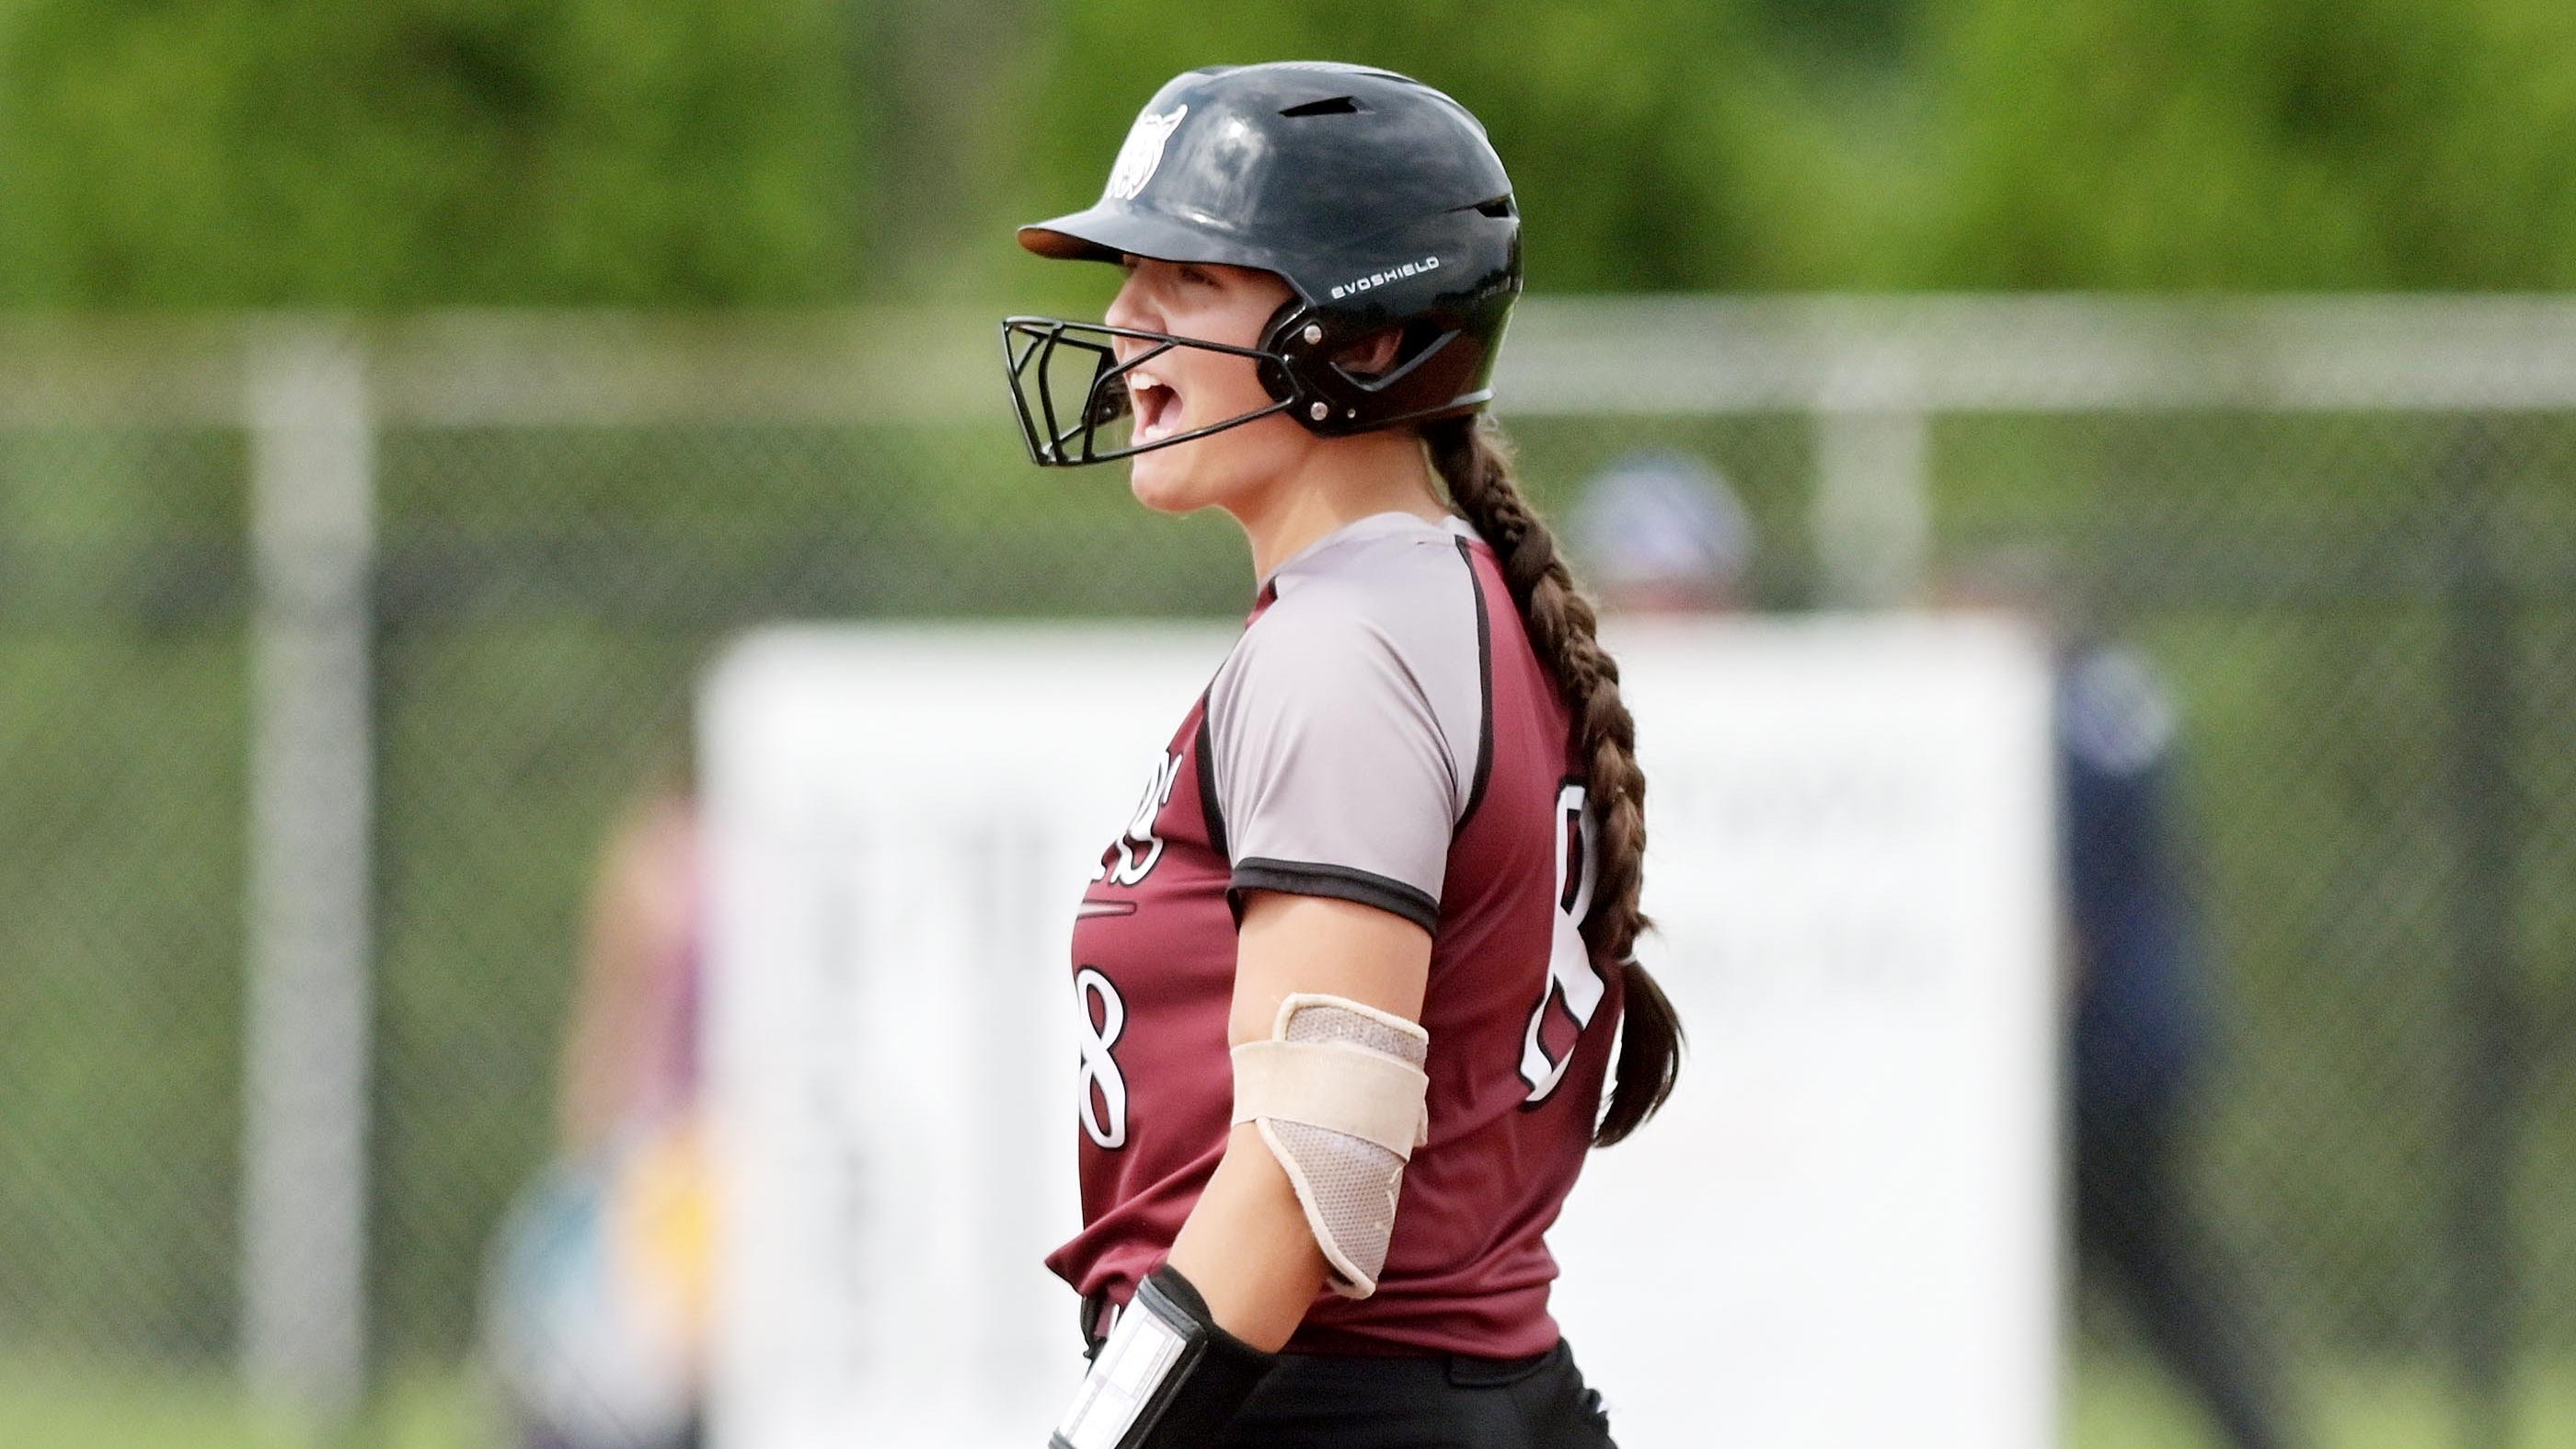 Previewing the PIAA softball and baseball playoff quarterfinals